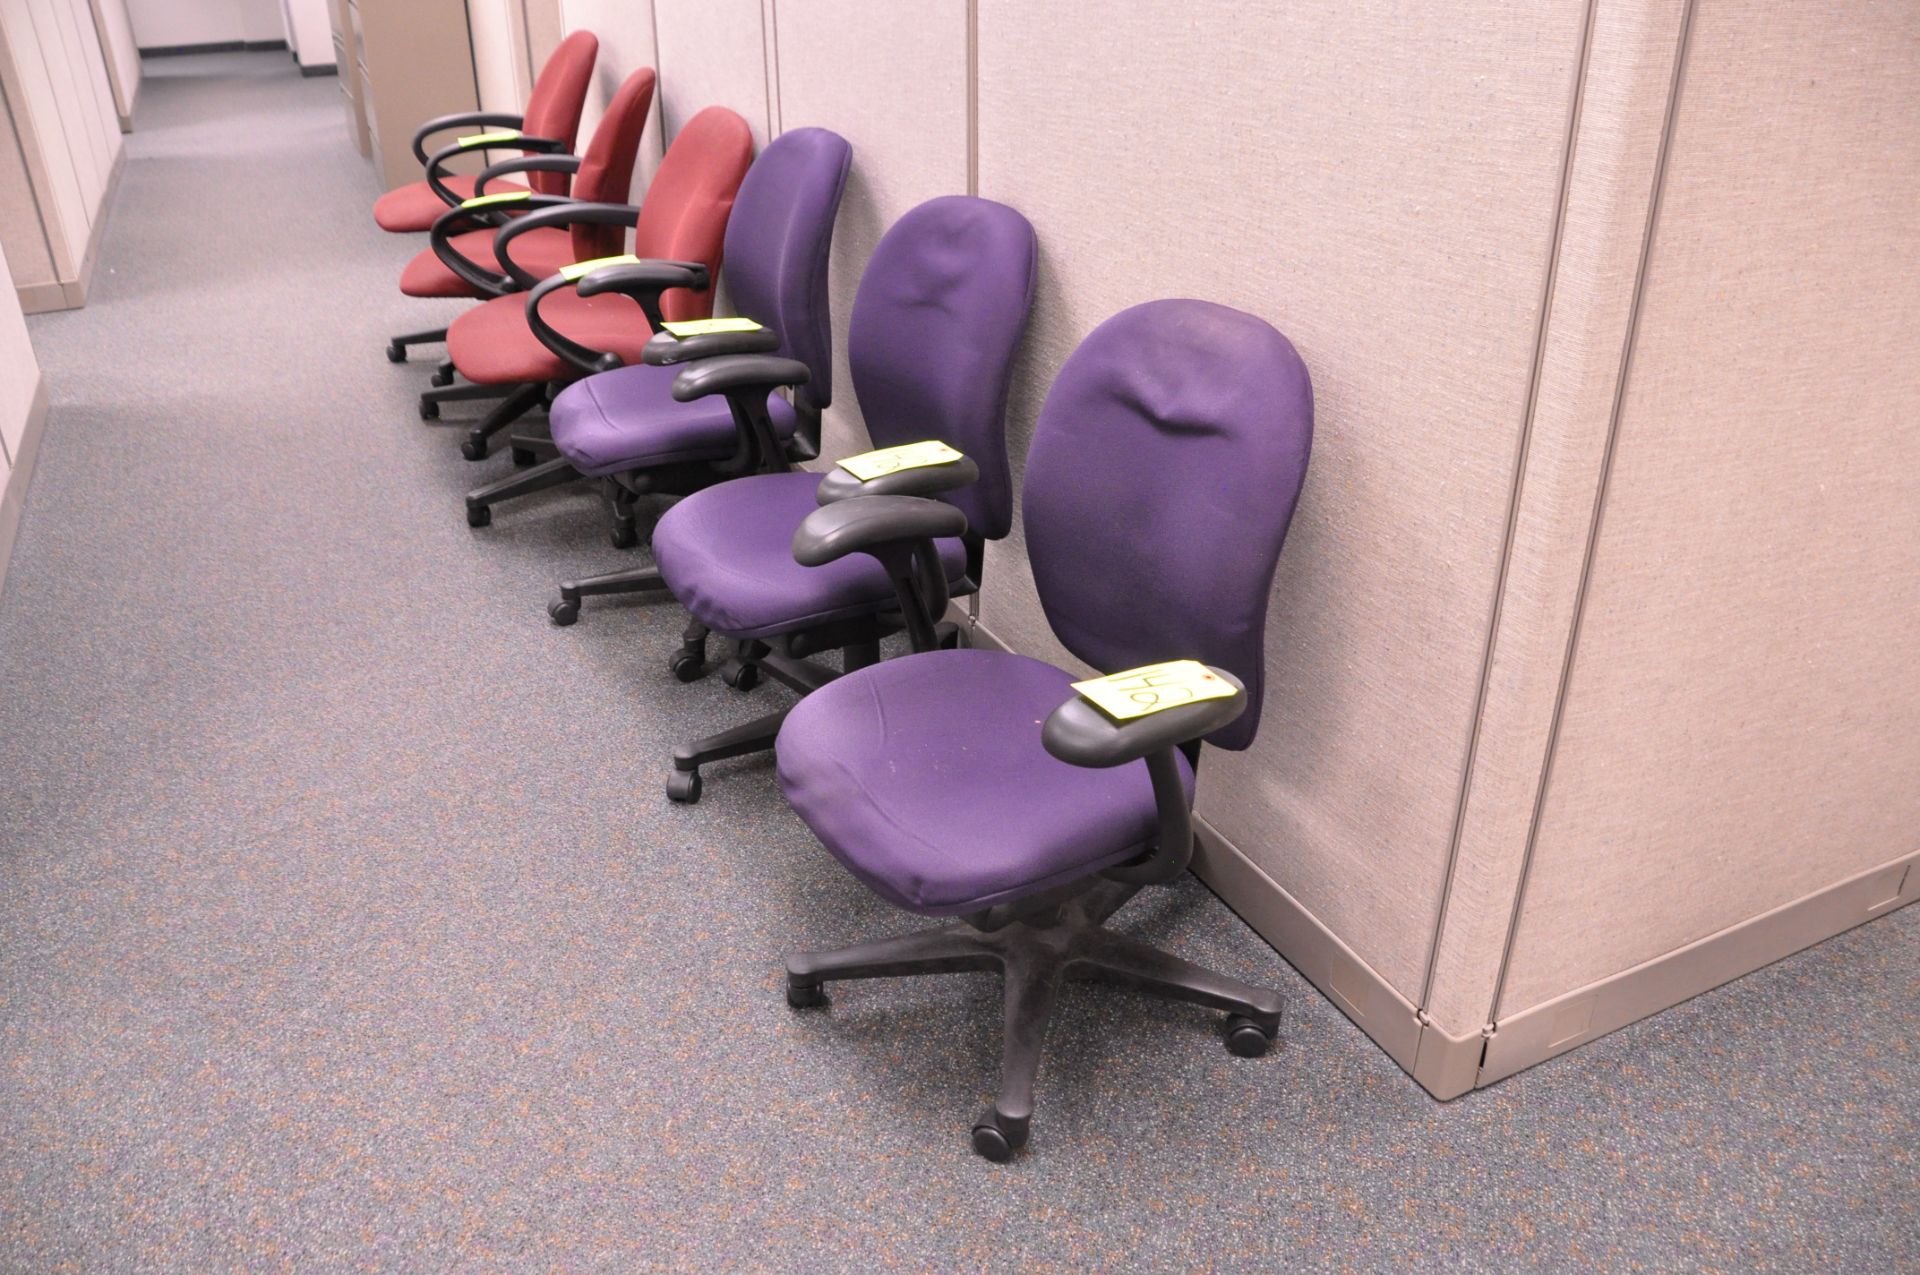 Lot-(3) Purple and (3) Red Upholstered Swivel Arm Office Chairs in (1) Group, (Located 2nd Floor